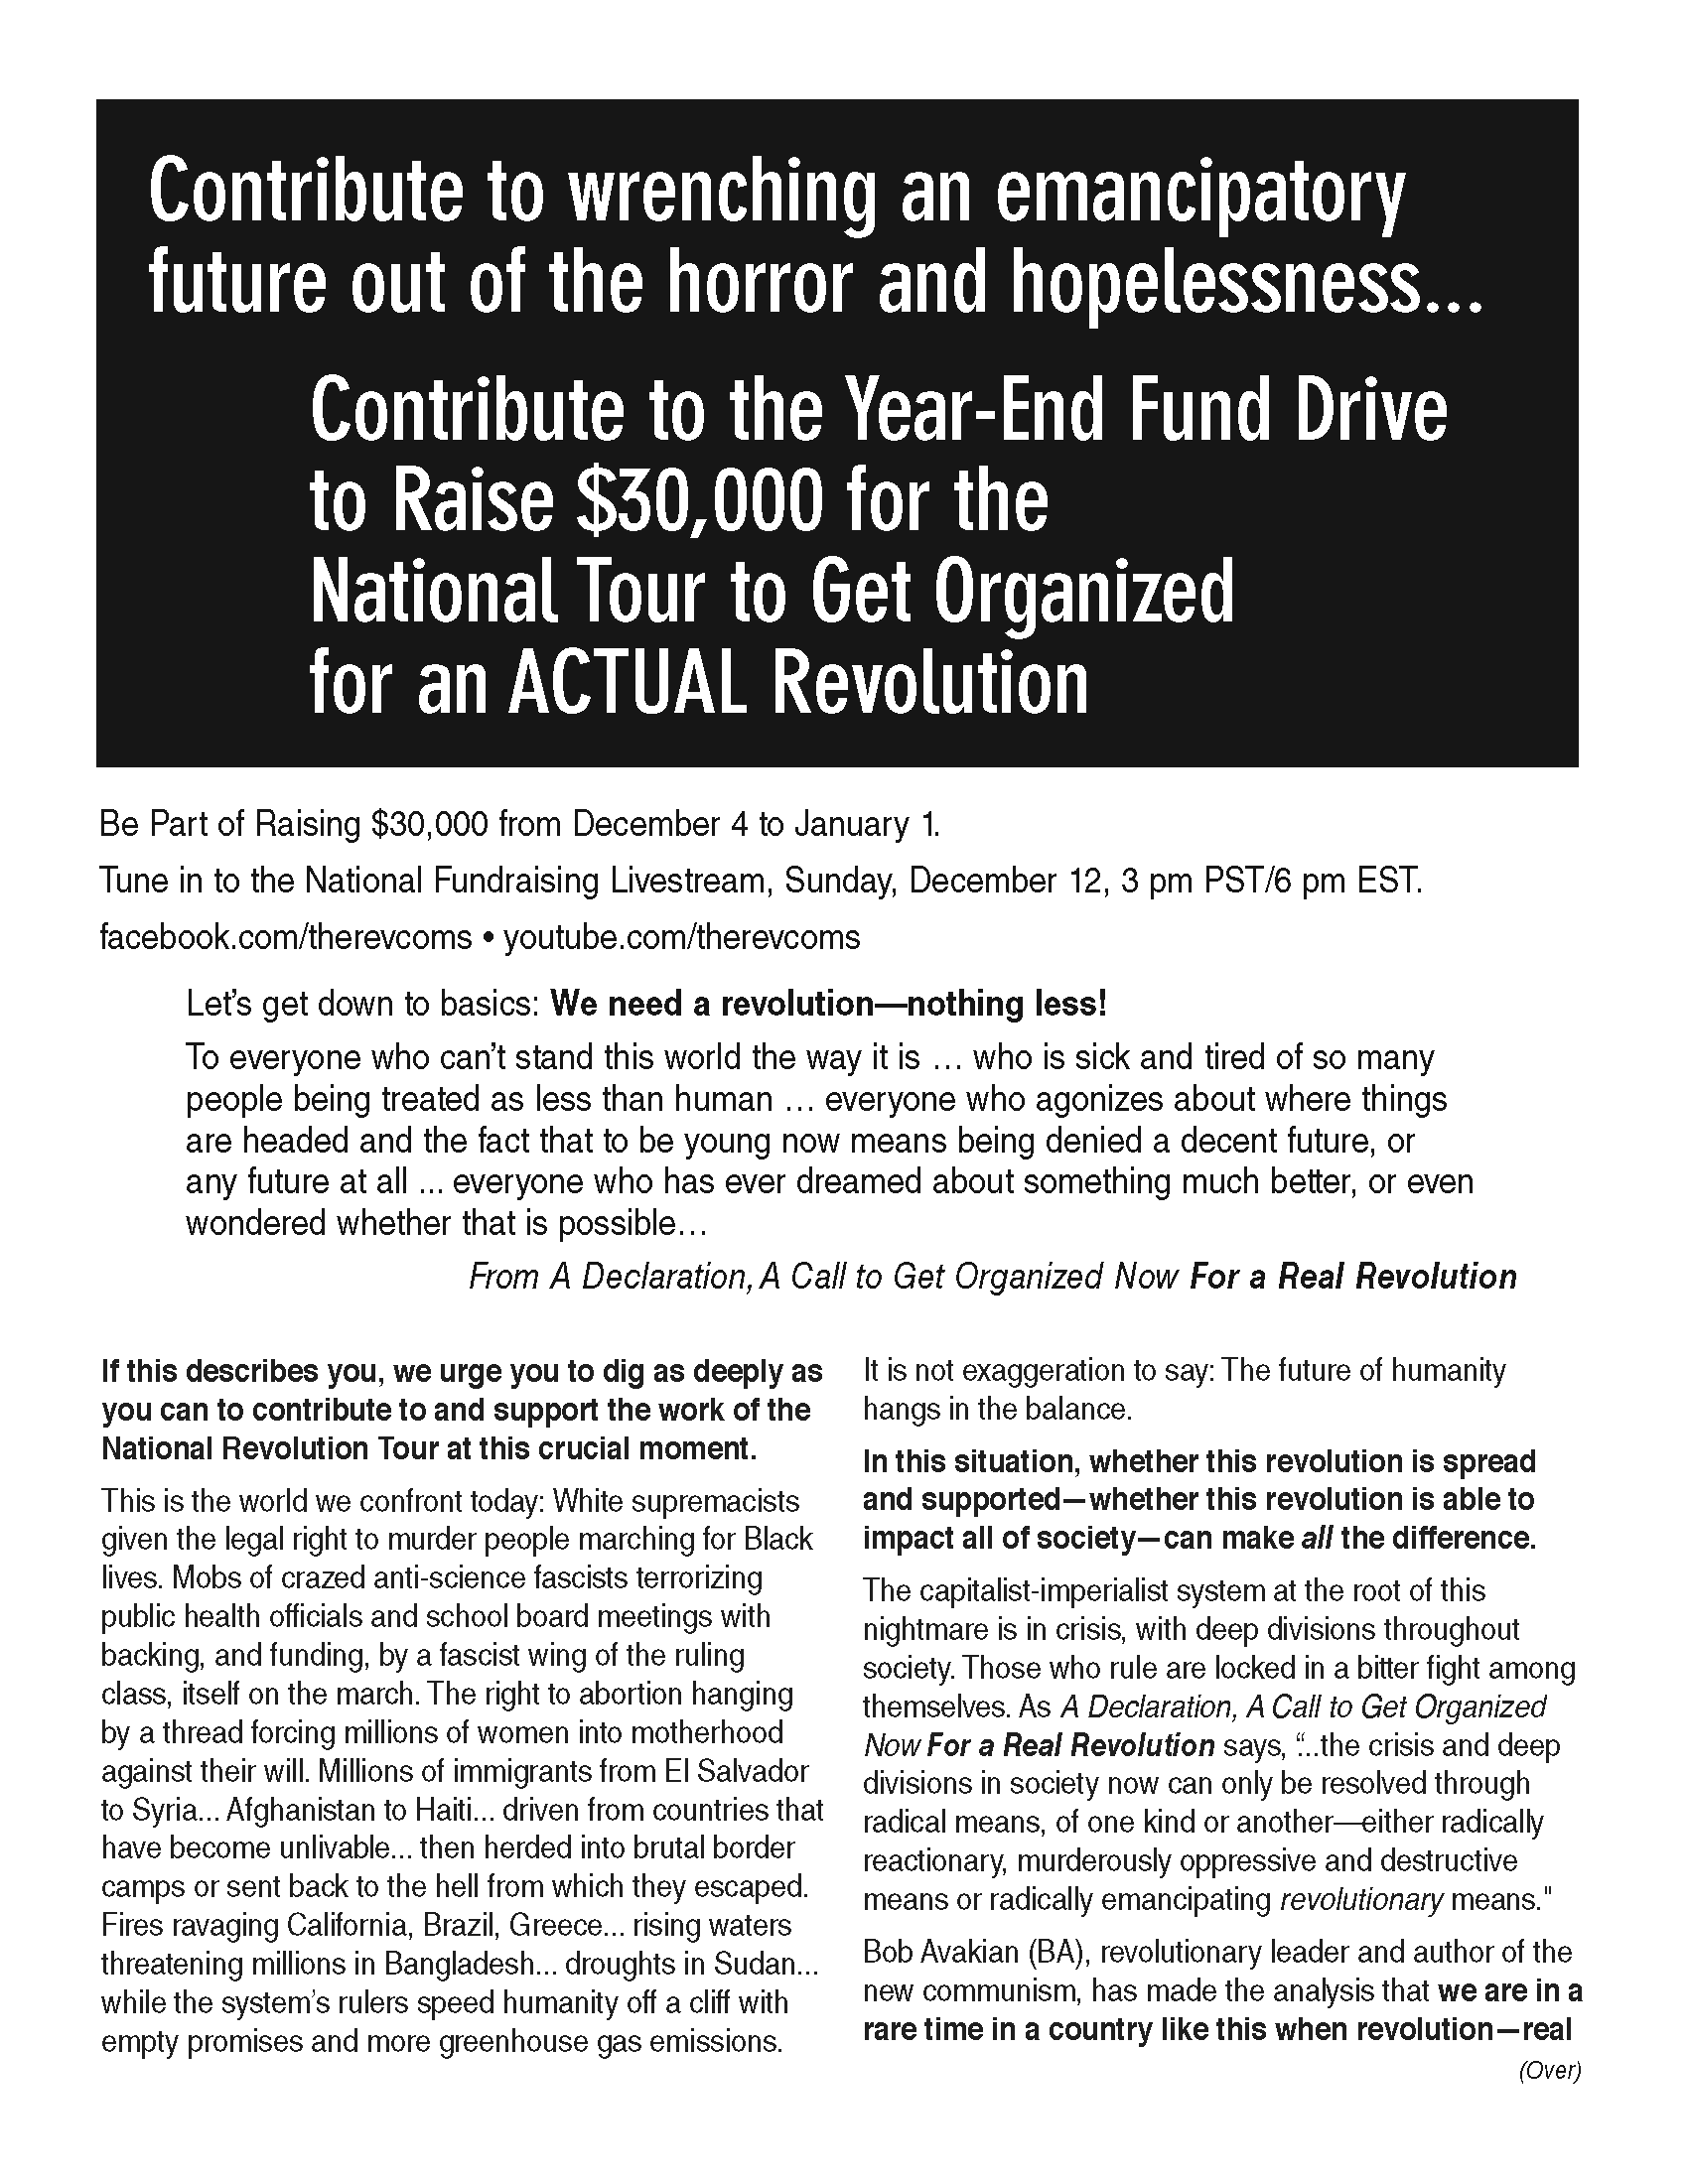 2021 Contribute to the Year-End Fund Drive to Raise $30,000 for the National Tour to Get Organized for an ACTUAL Revolution